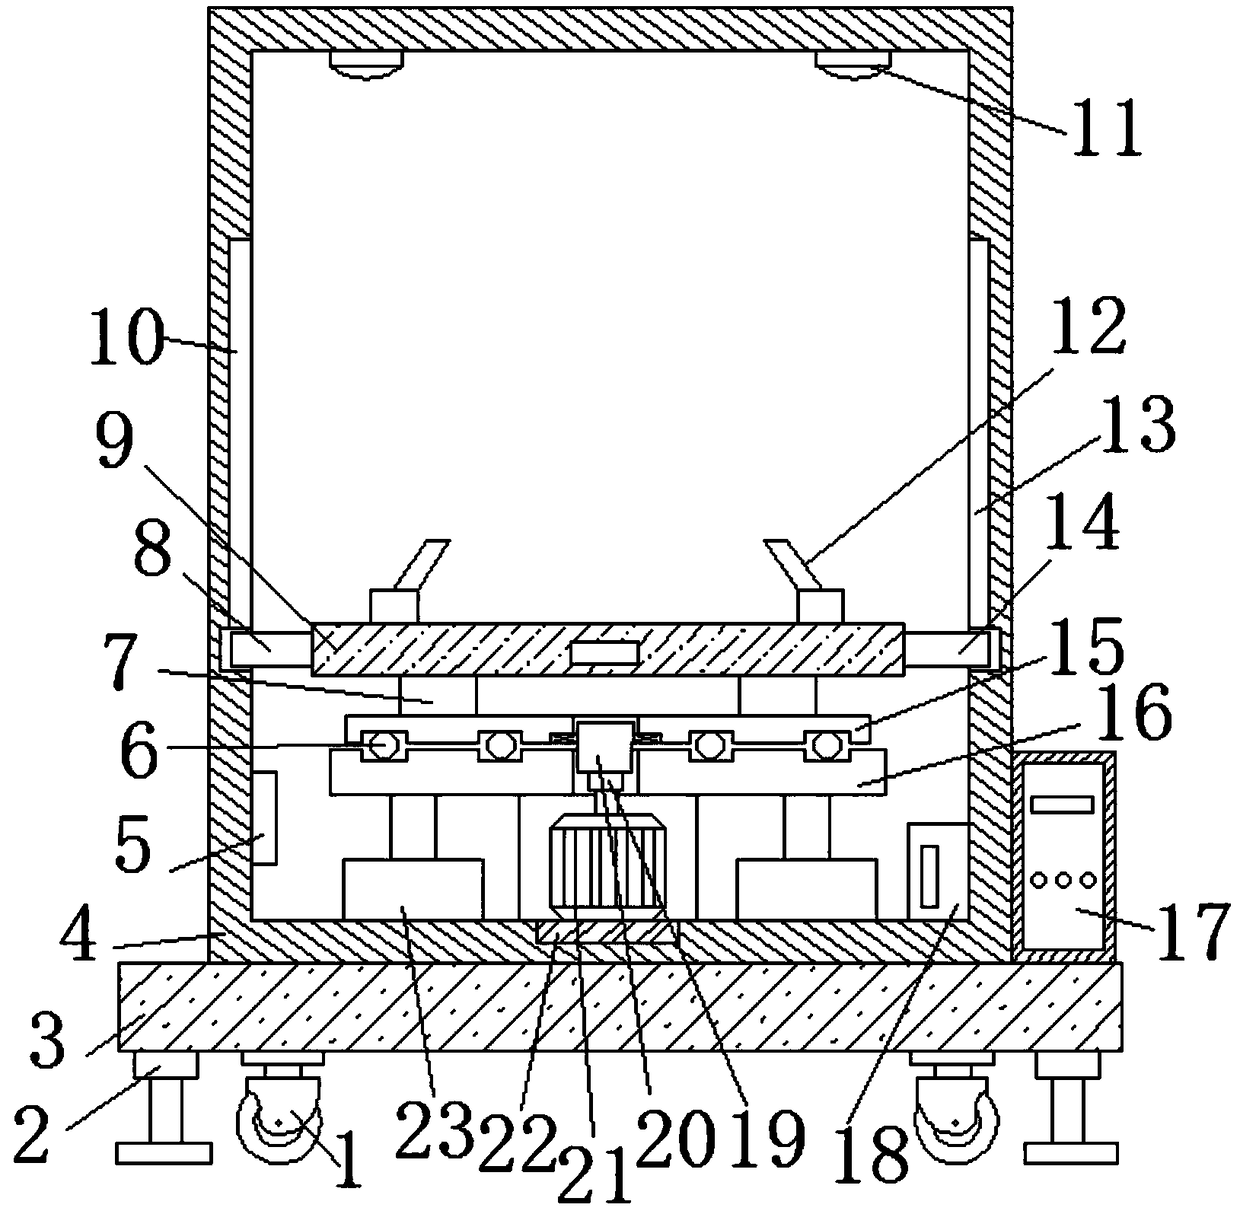 Display device convenient for dust removal used for computer hardware development